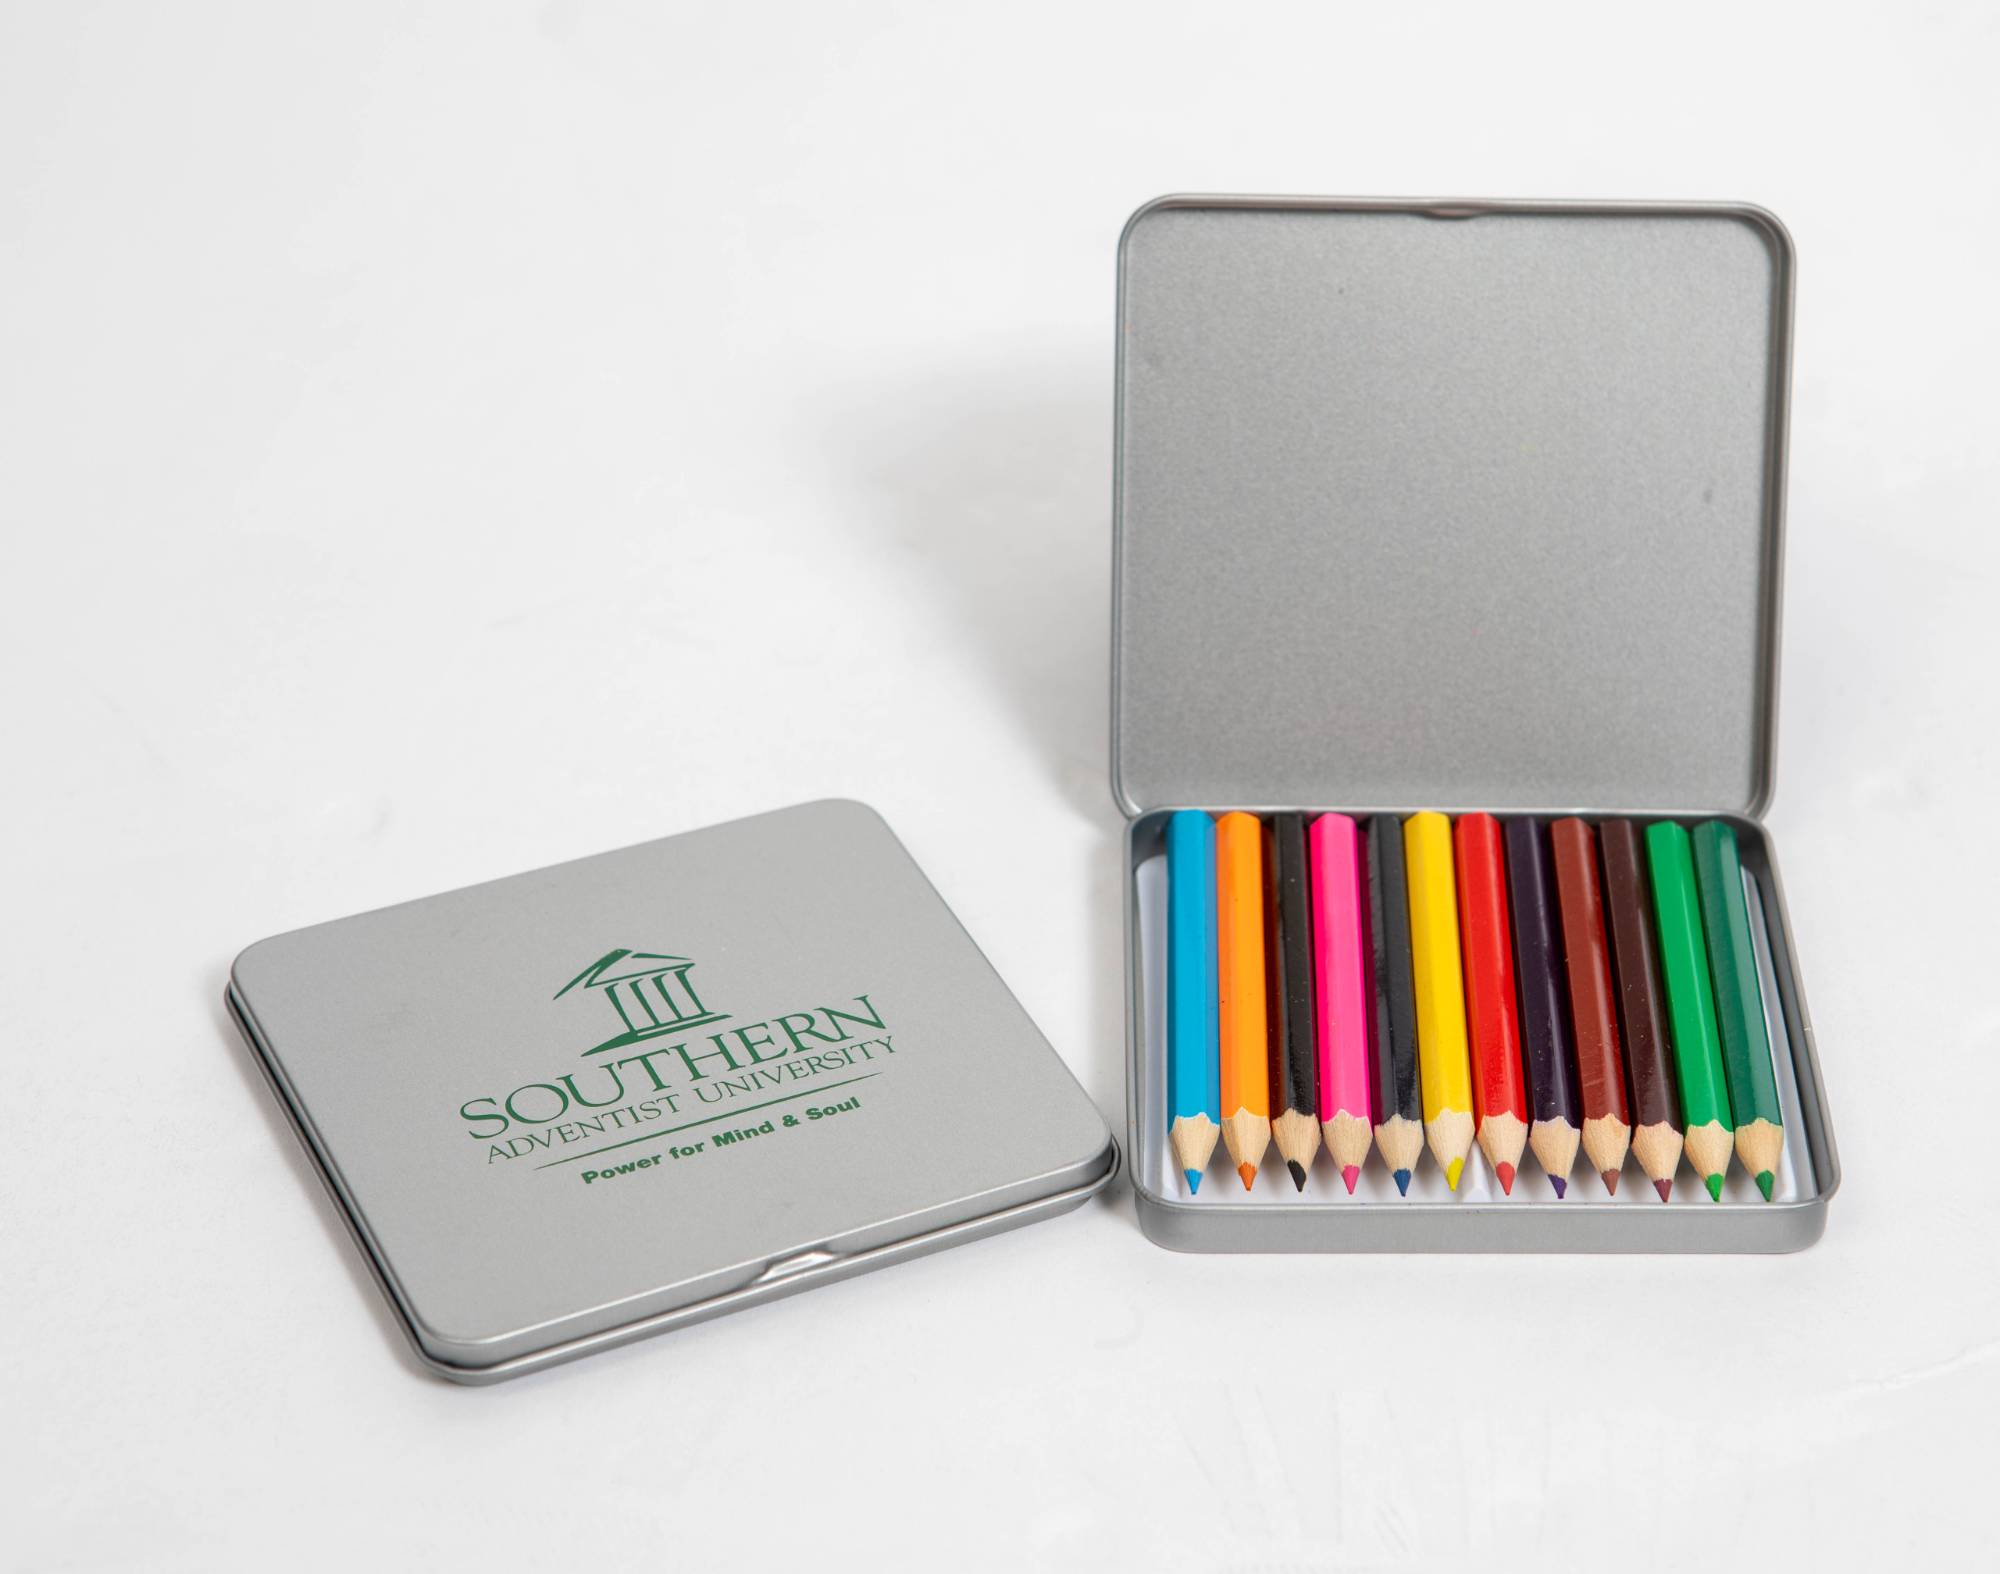 Pocket sized color pencils inside silver Southern branded tin